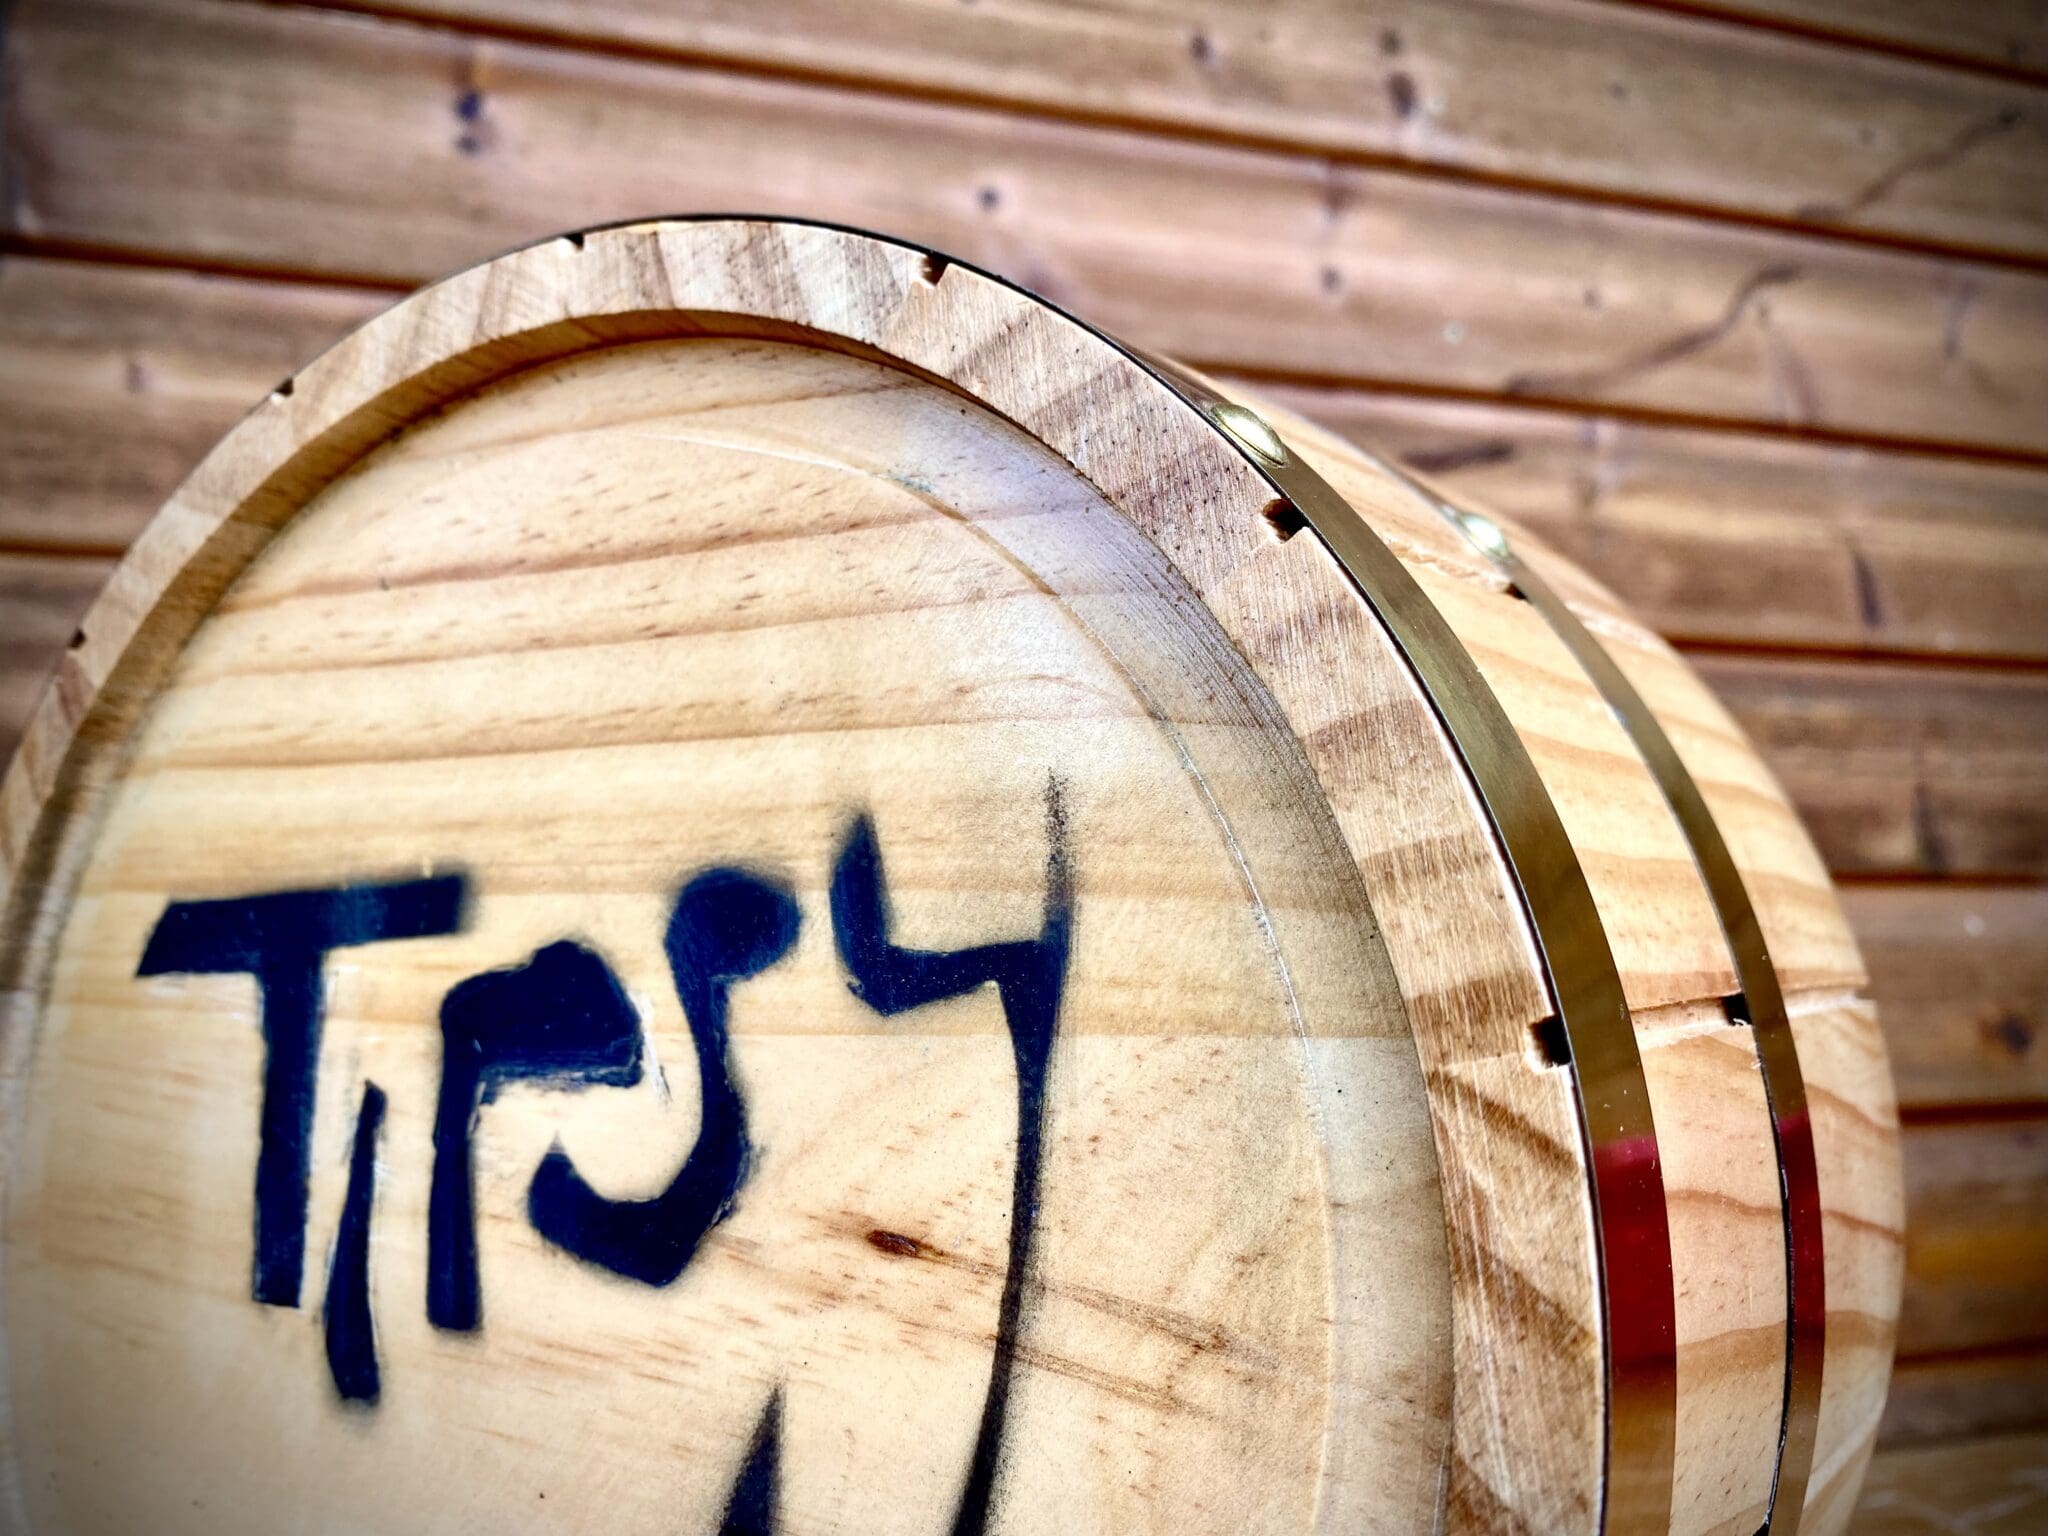 A wooden barrel with the word tryy painted on it.